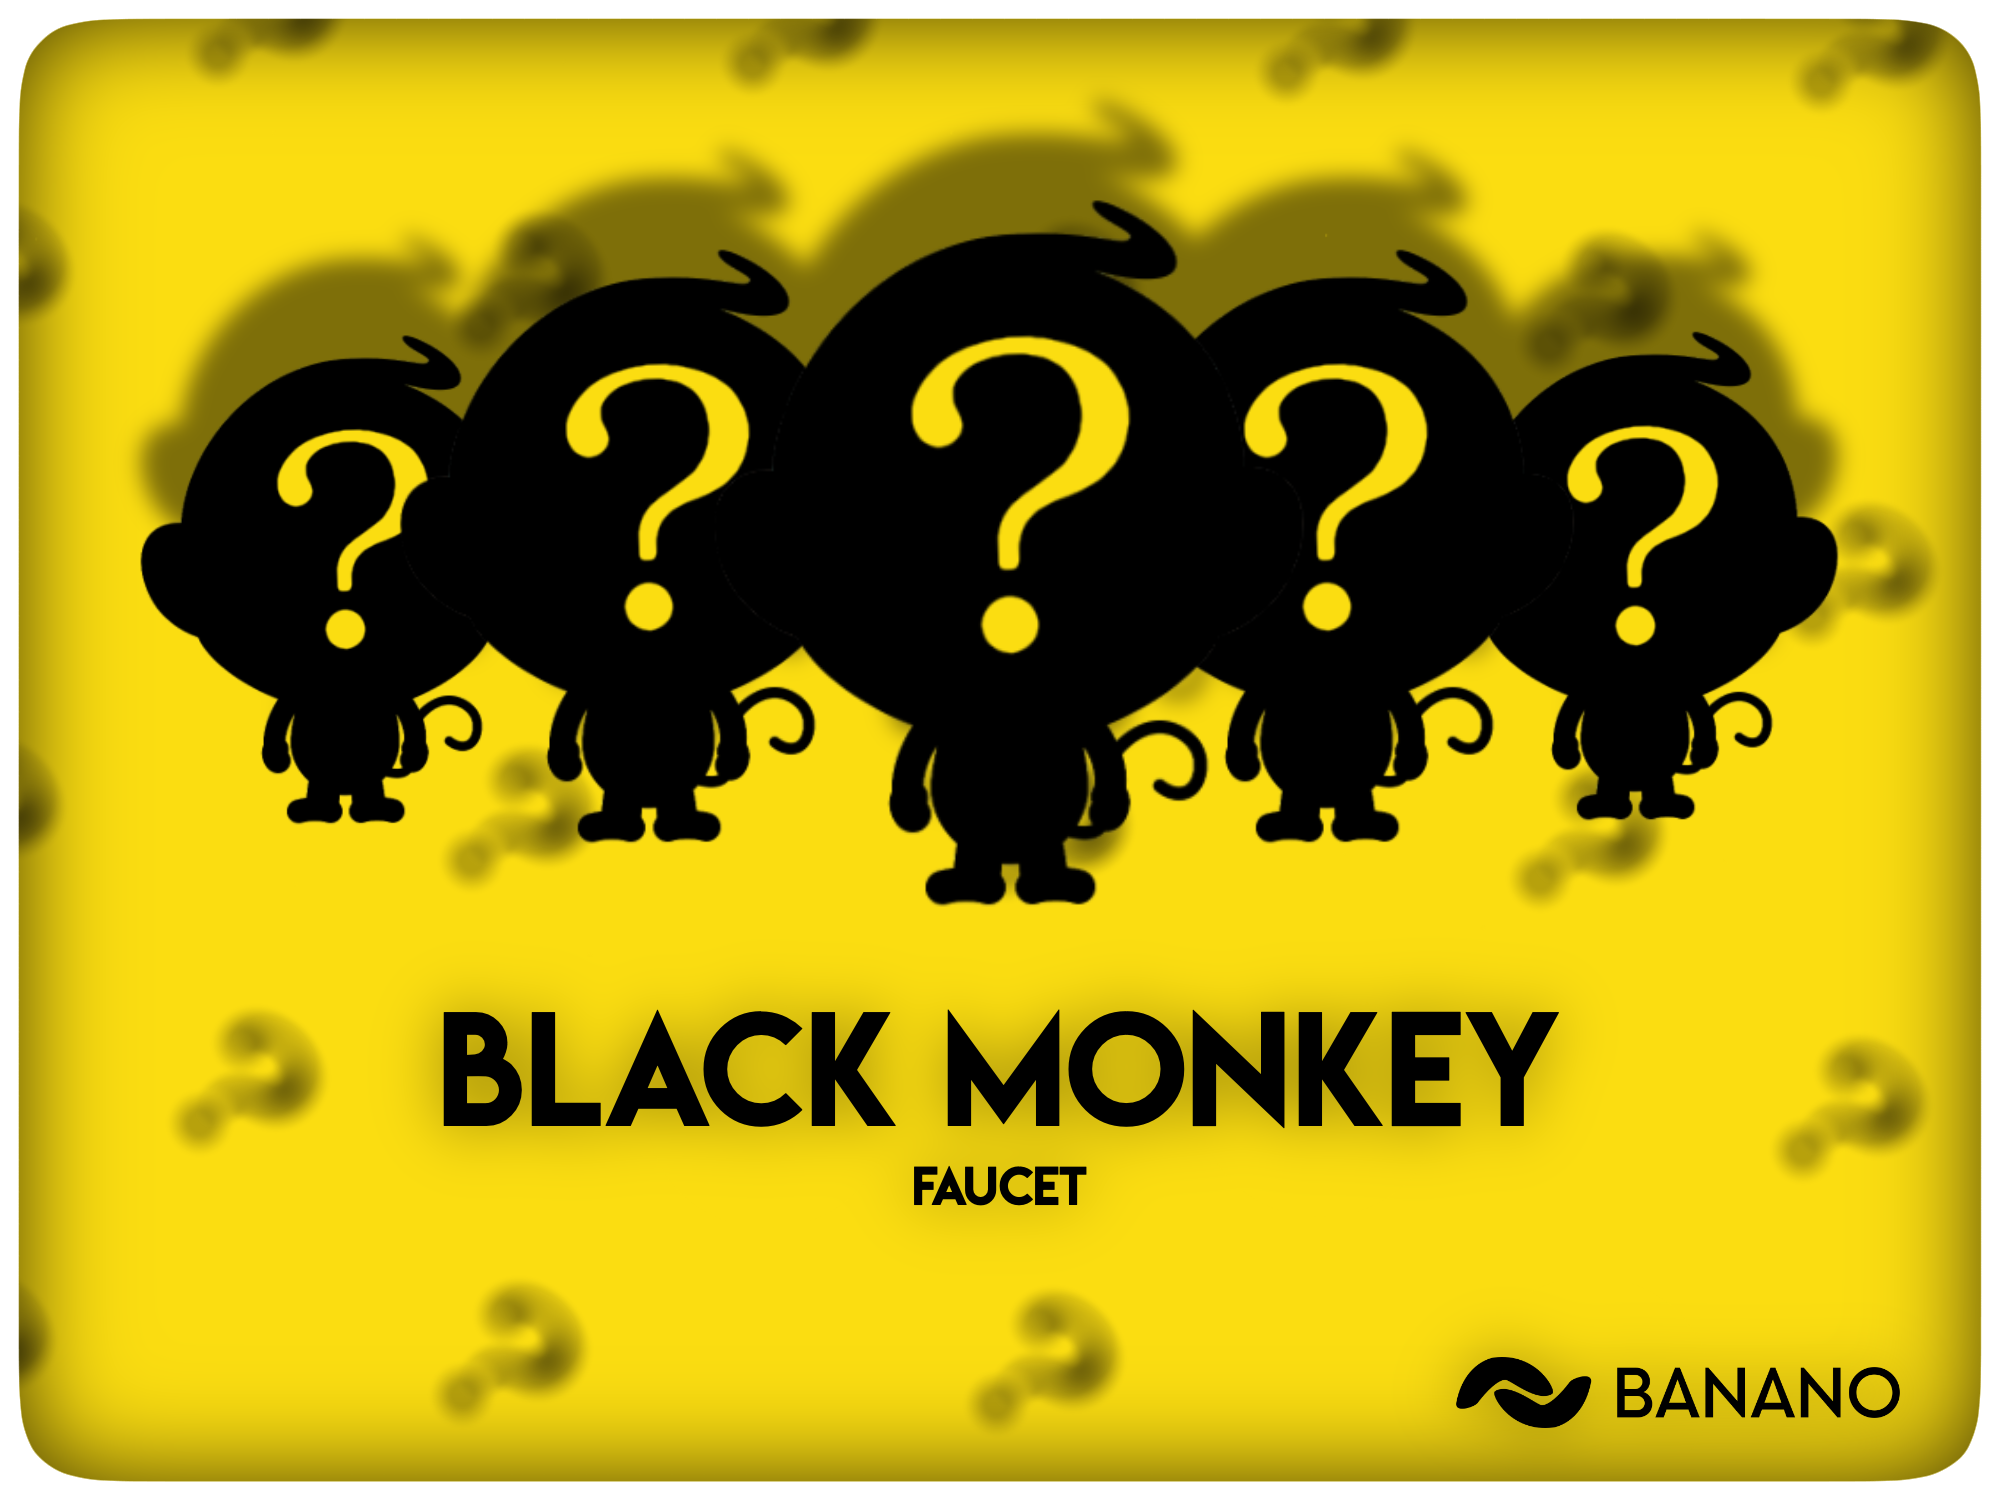 BANANO Faucet Game ‘Black Monkey’ Round 19 has just started!